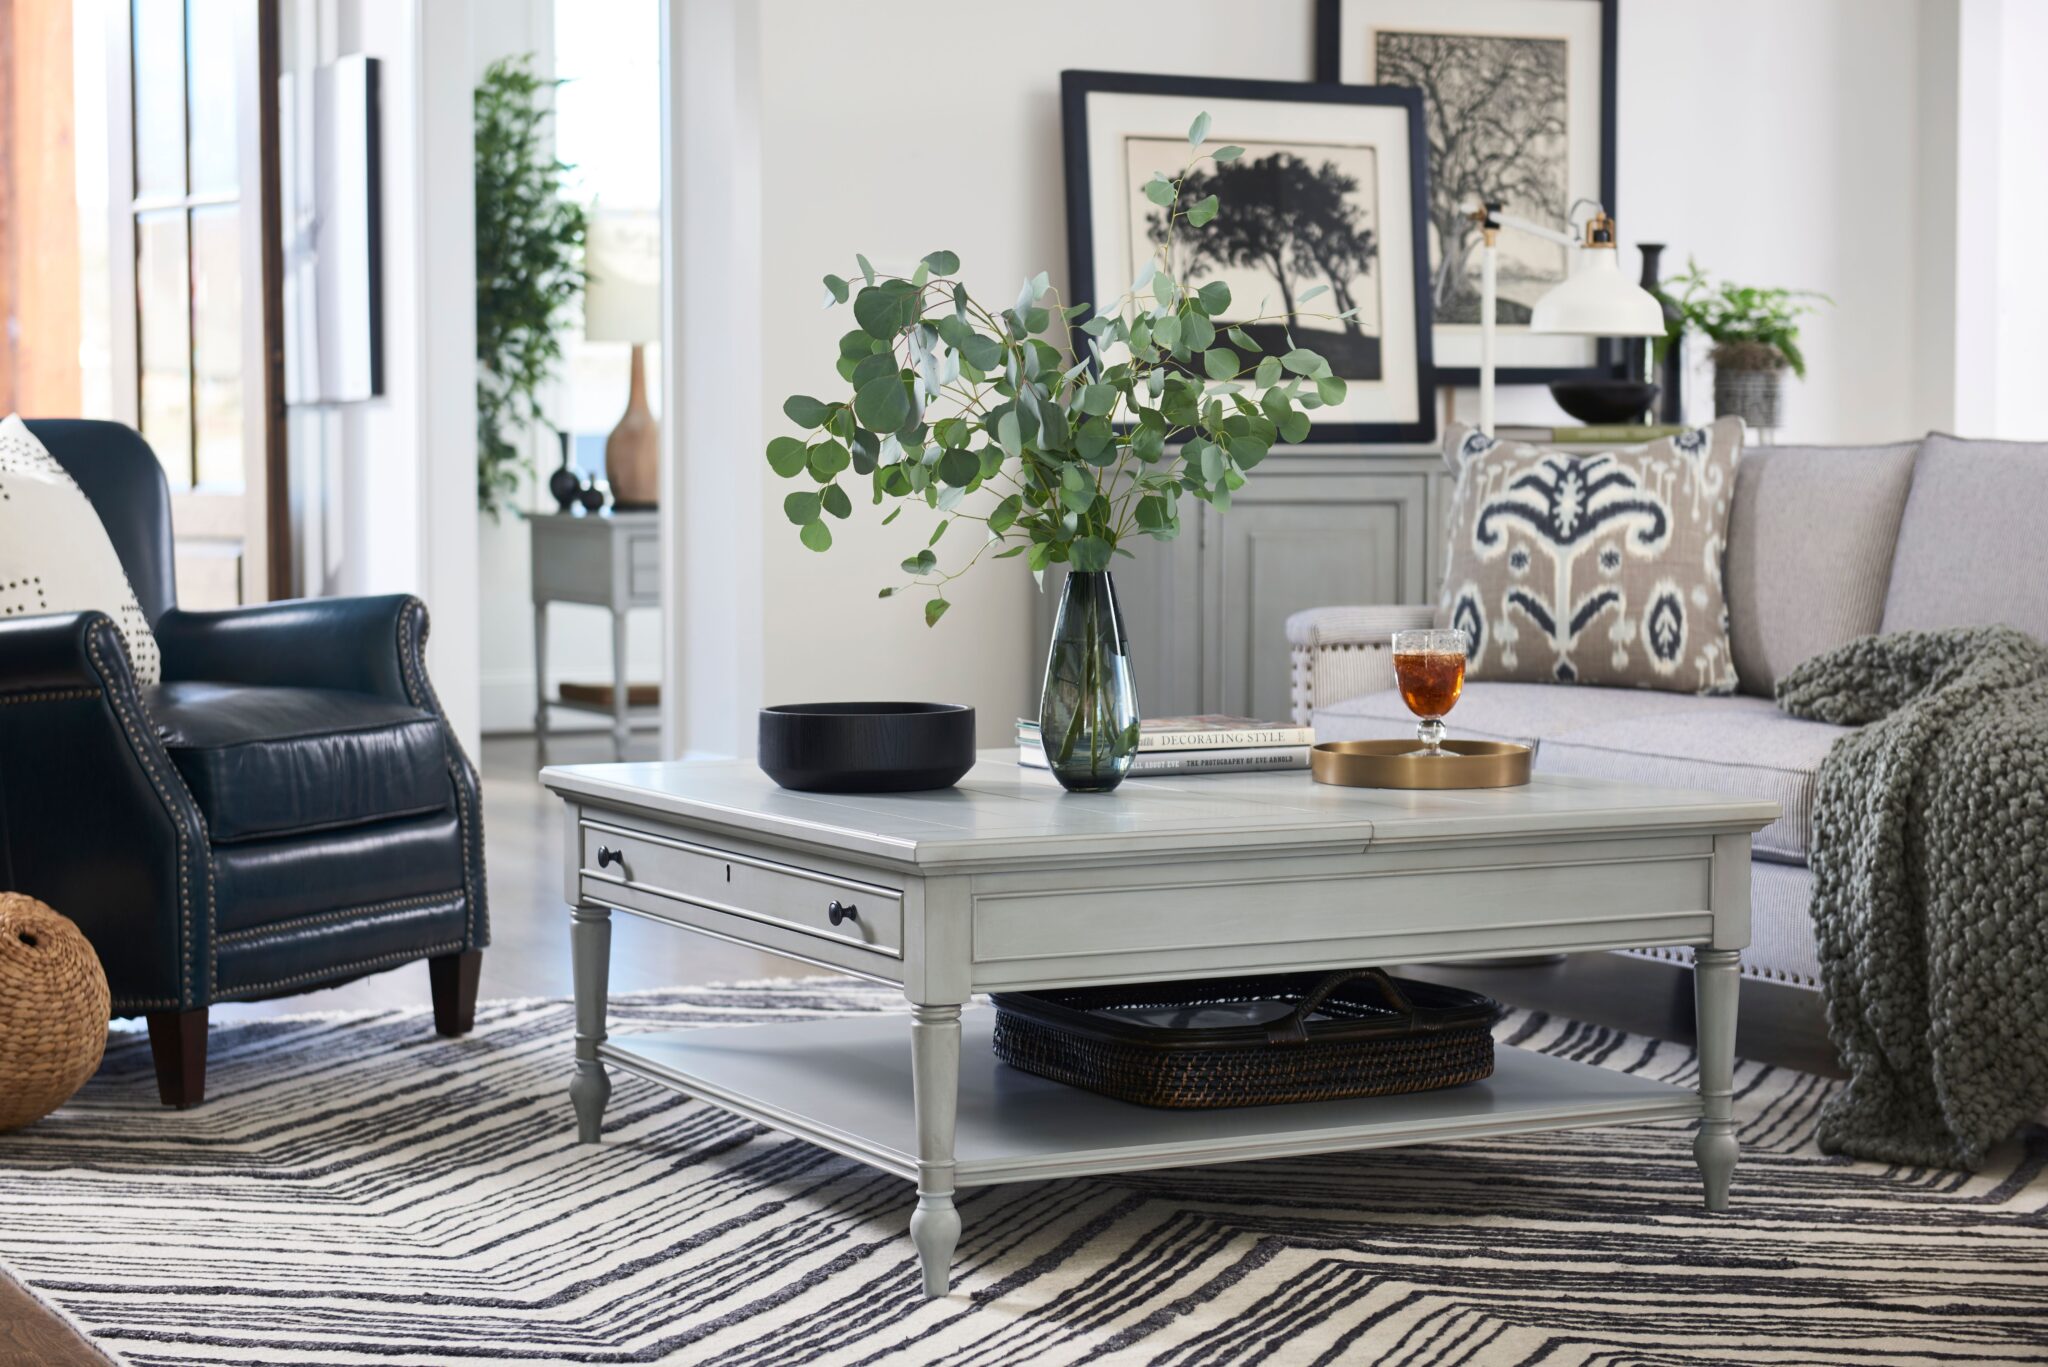 How to Position and Style Coffee Tables and Ottomans